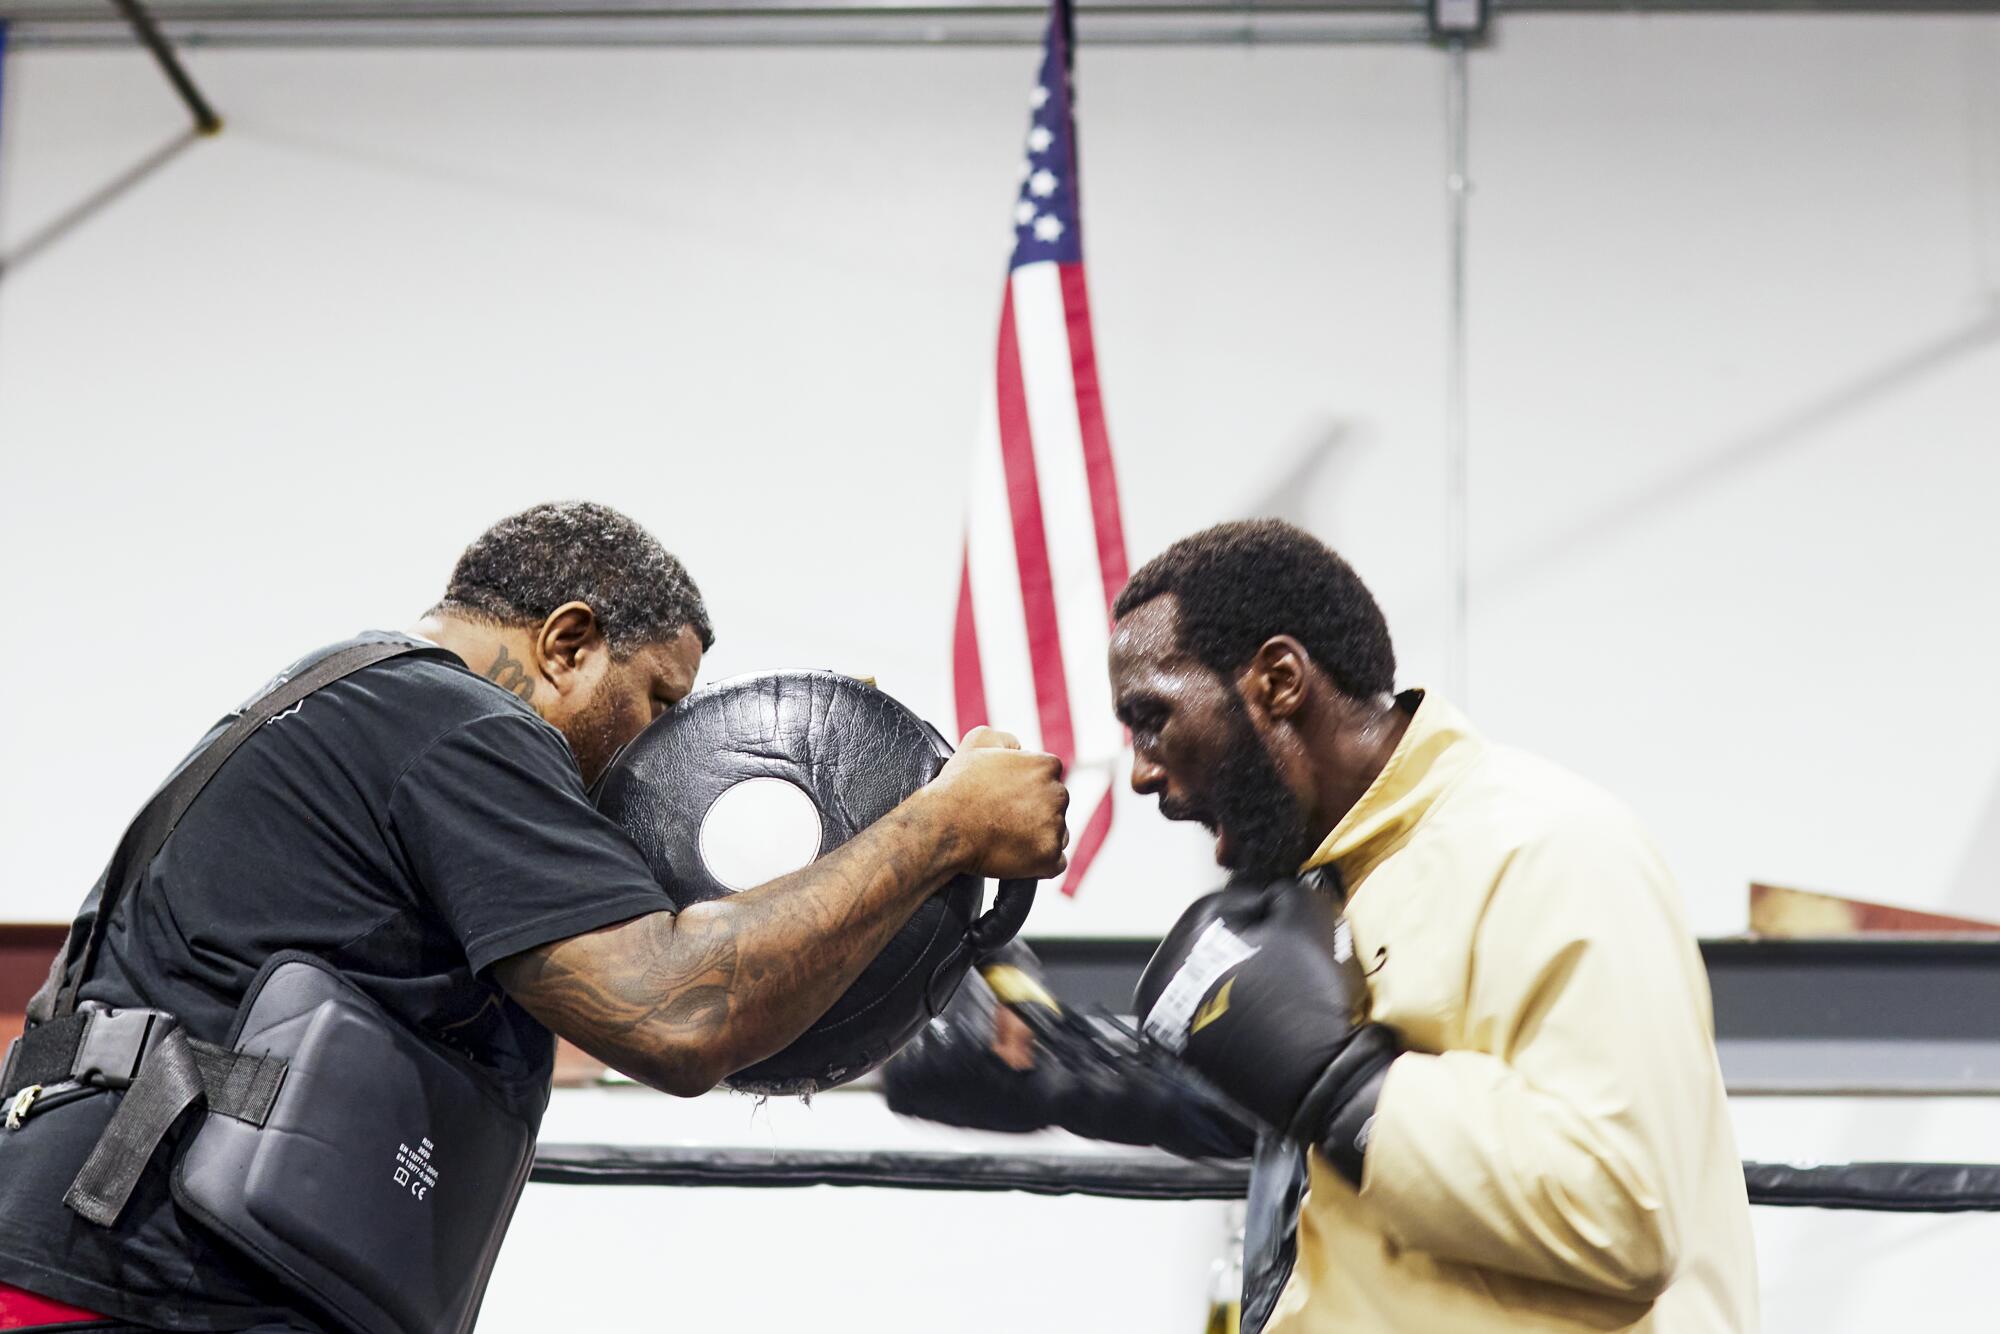 Terence "Bud" Crawford punches during a training session at the Triple Threat Boxing Gym in Colorado Springs, Colo.